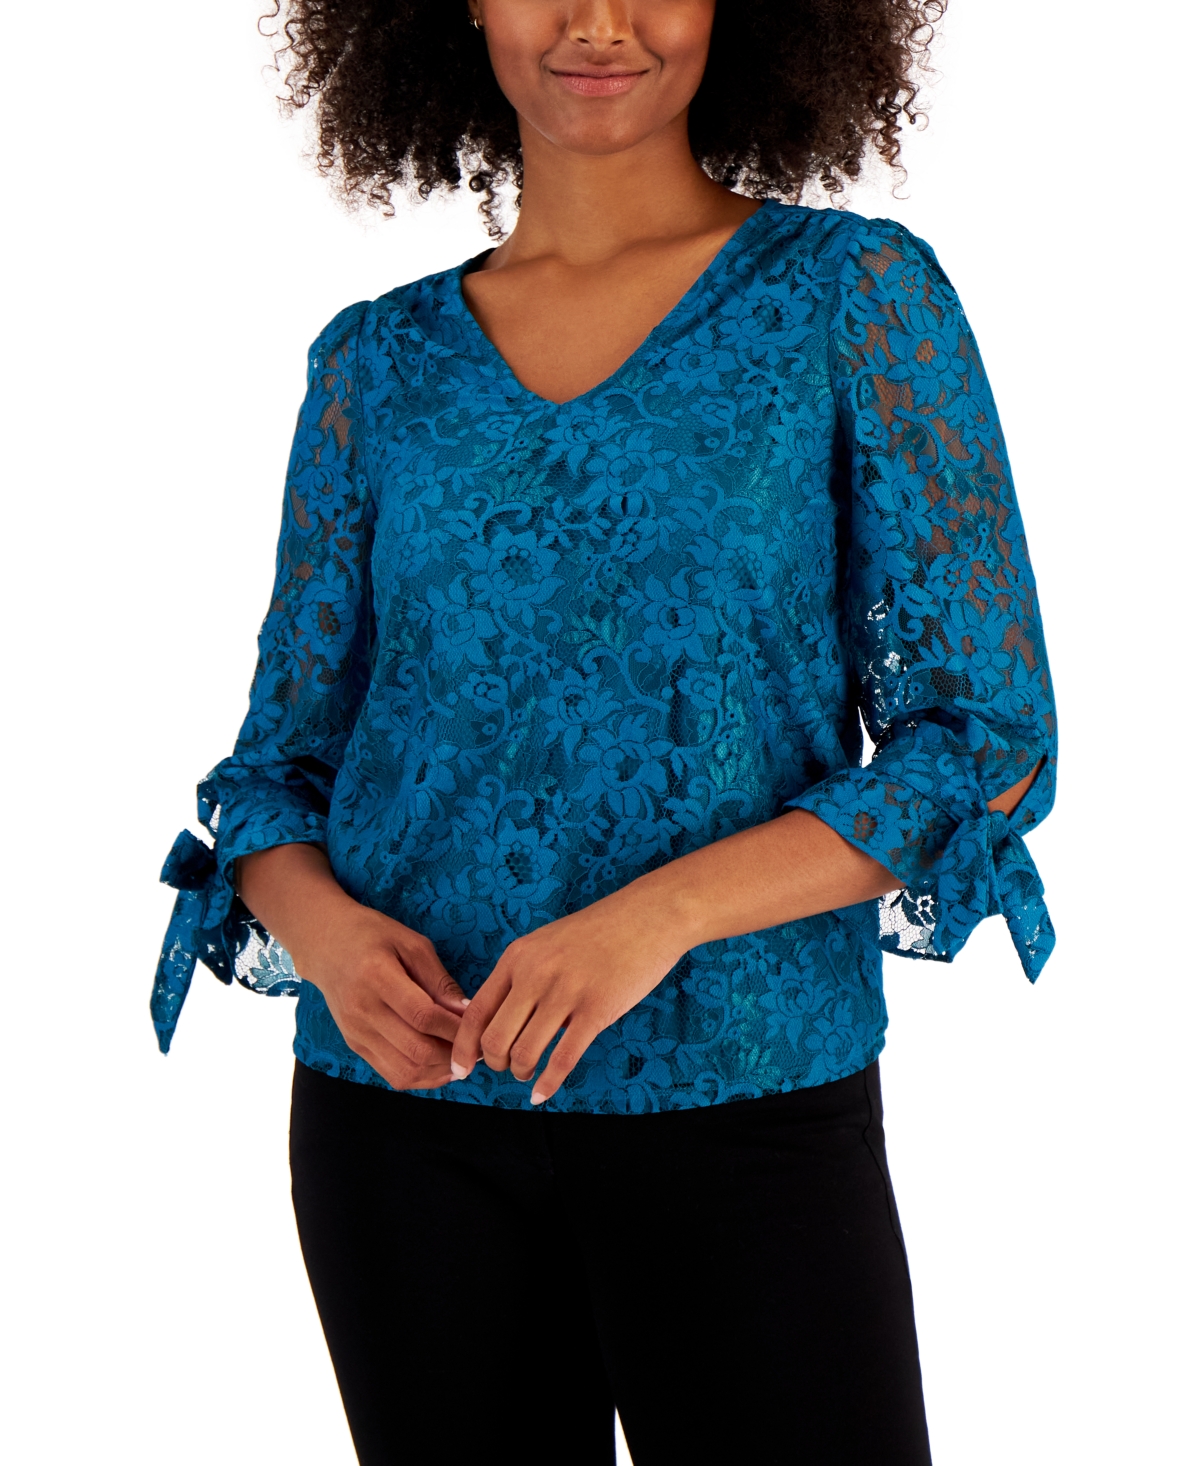 Charter Club Women's Lace Overlay Top, Created for Macy's